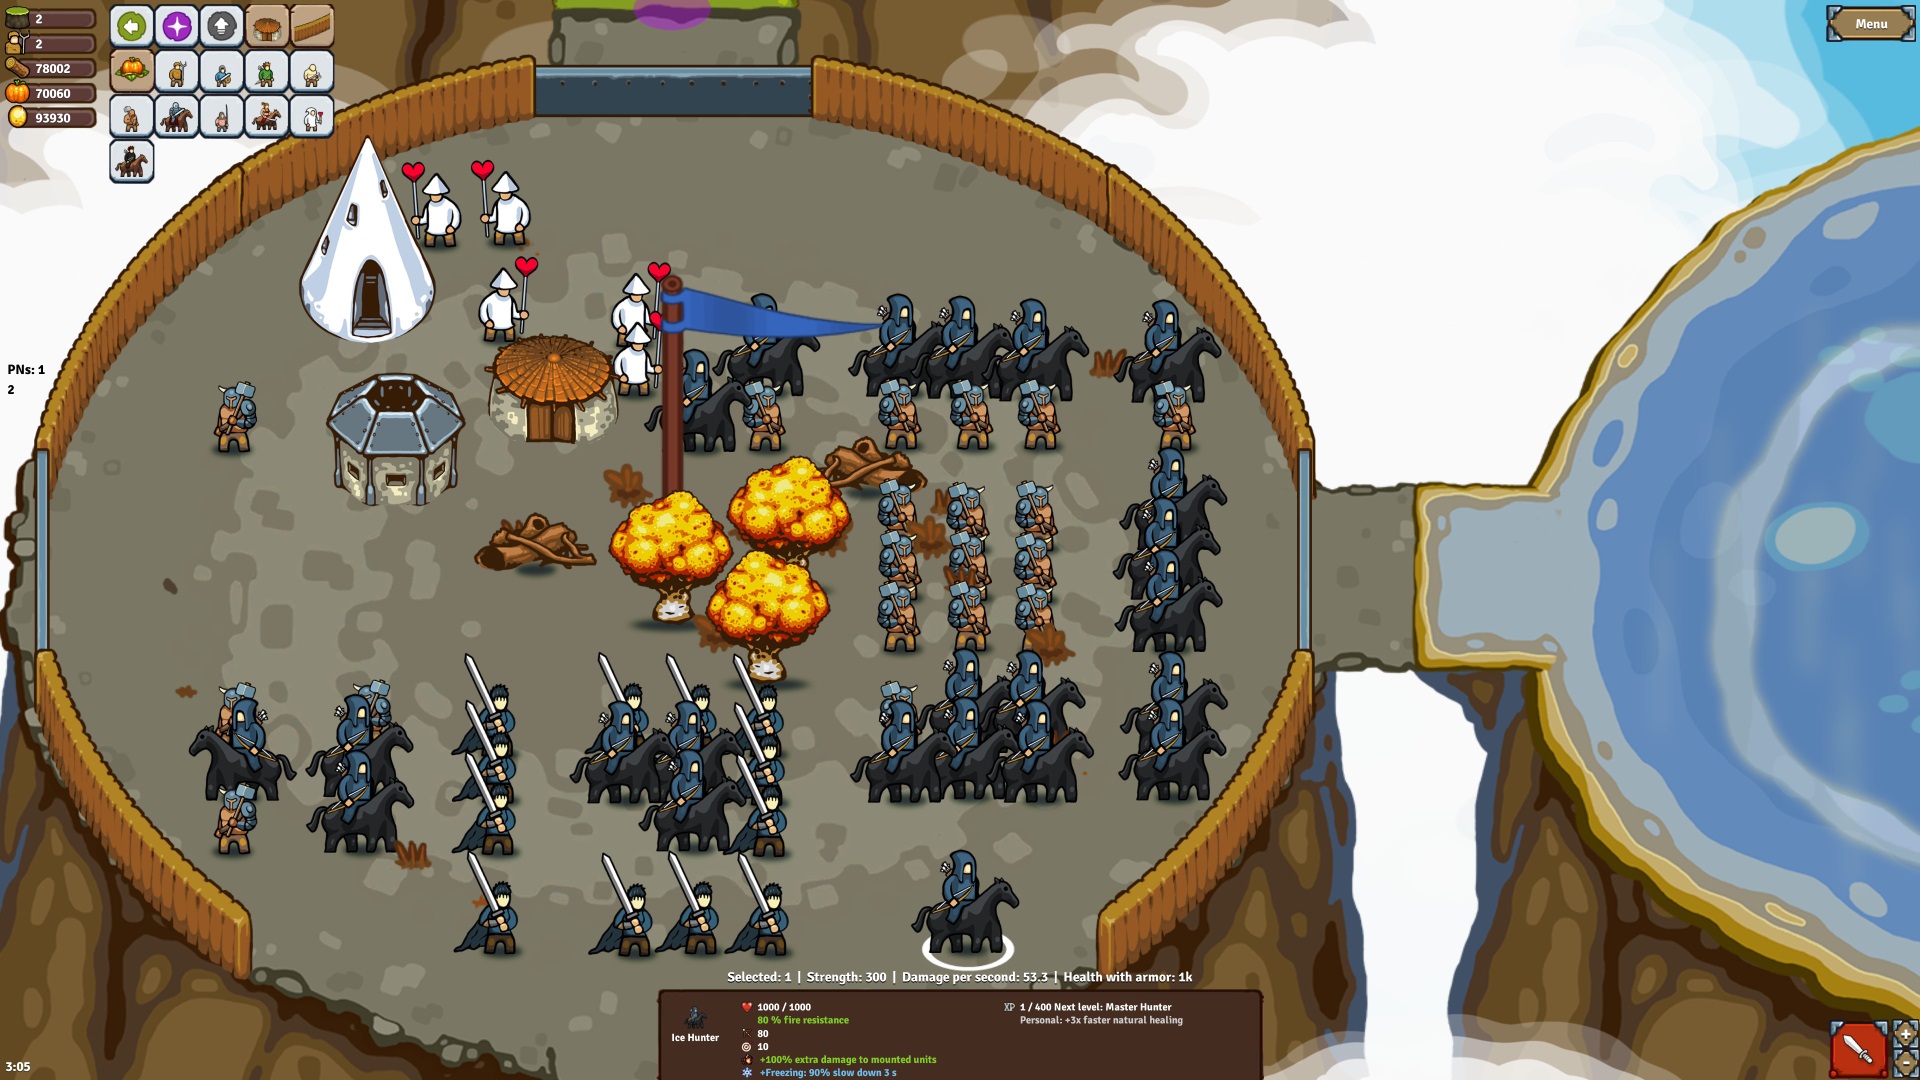 Leaders Needed for Epic Battles in CIRCLE EMPIRES RIVALS Open Beta